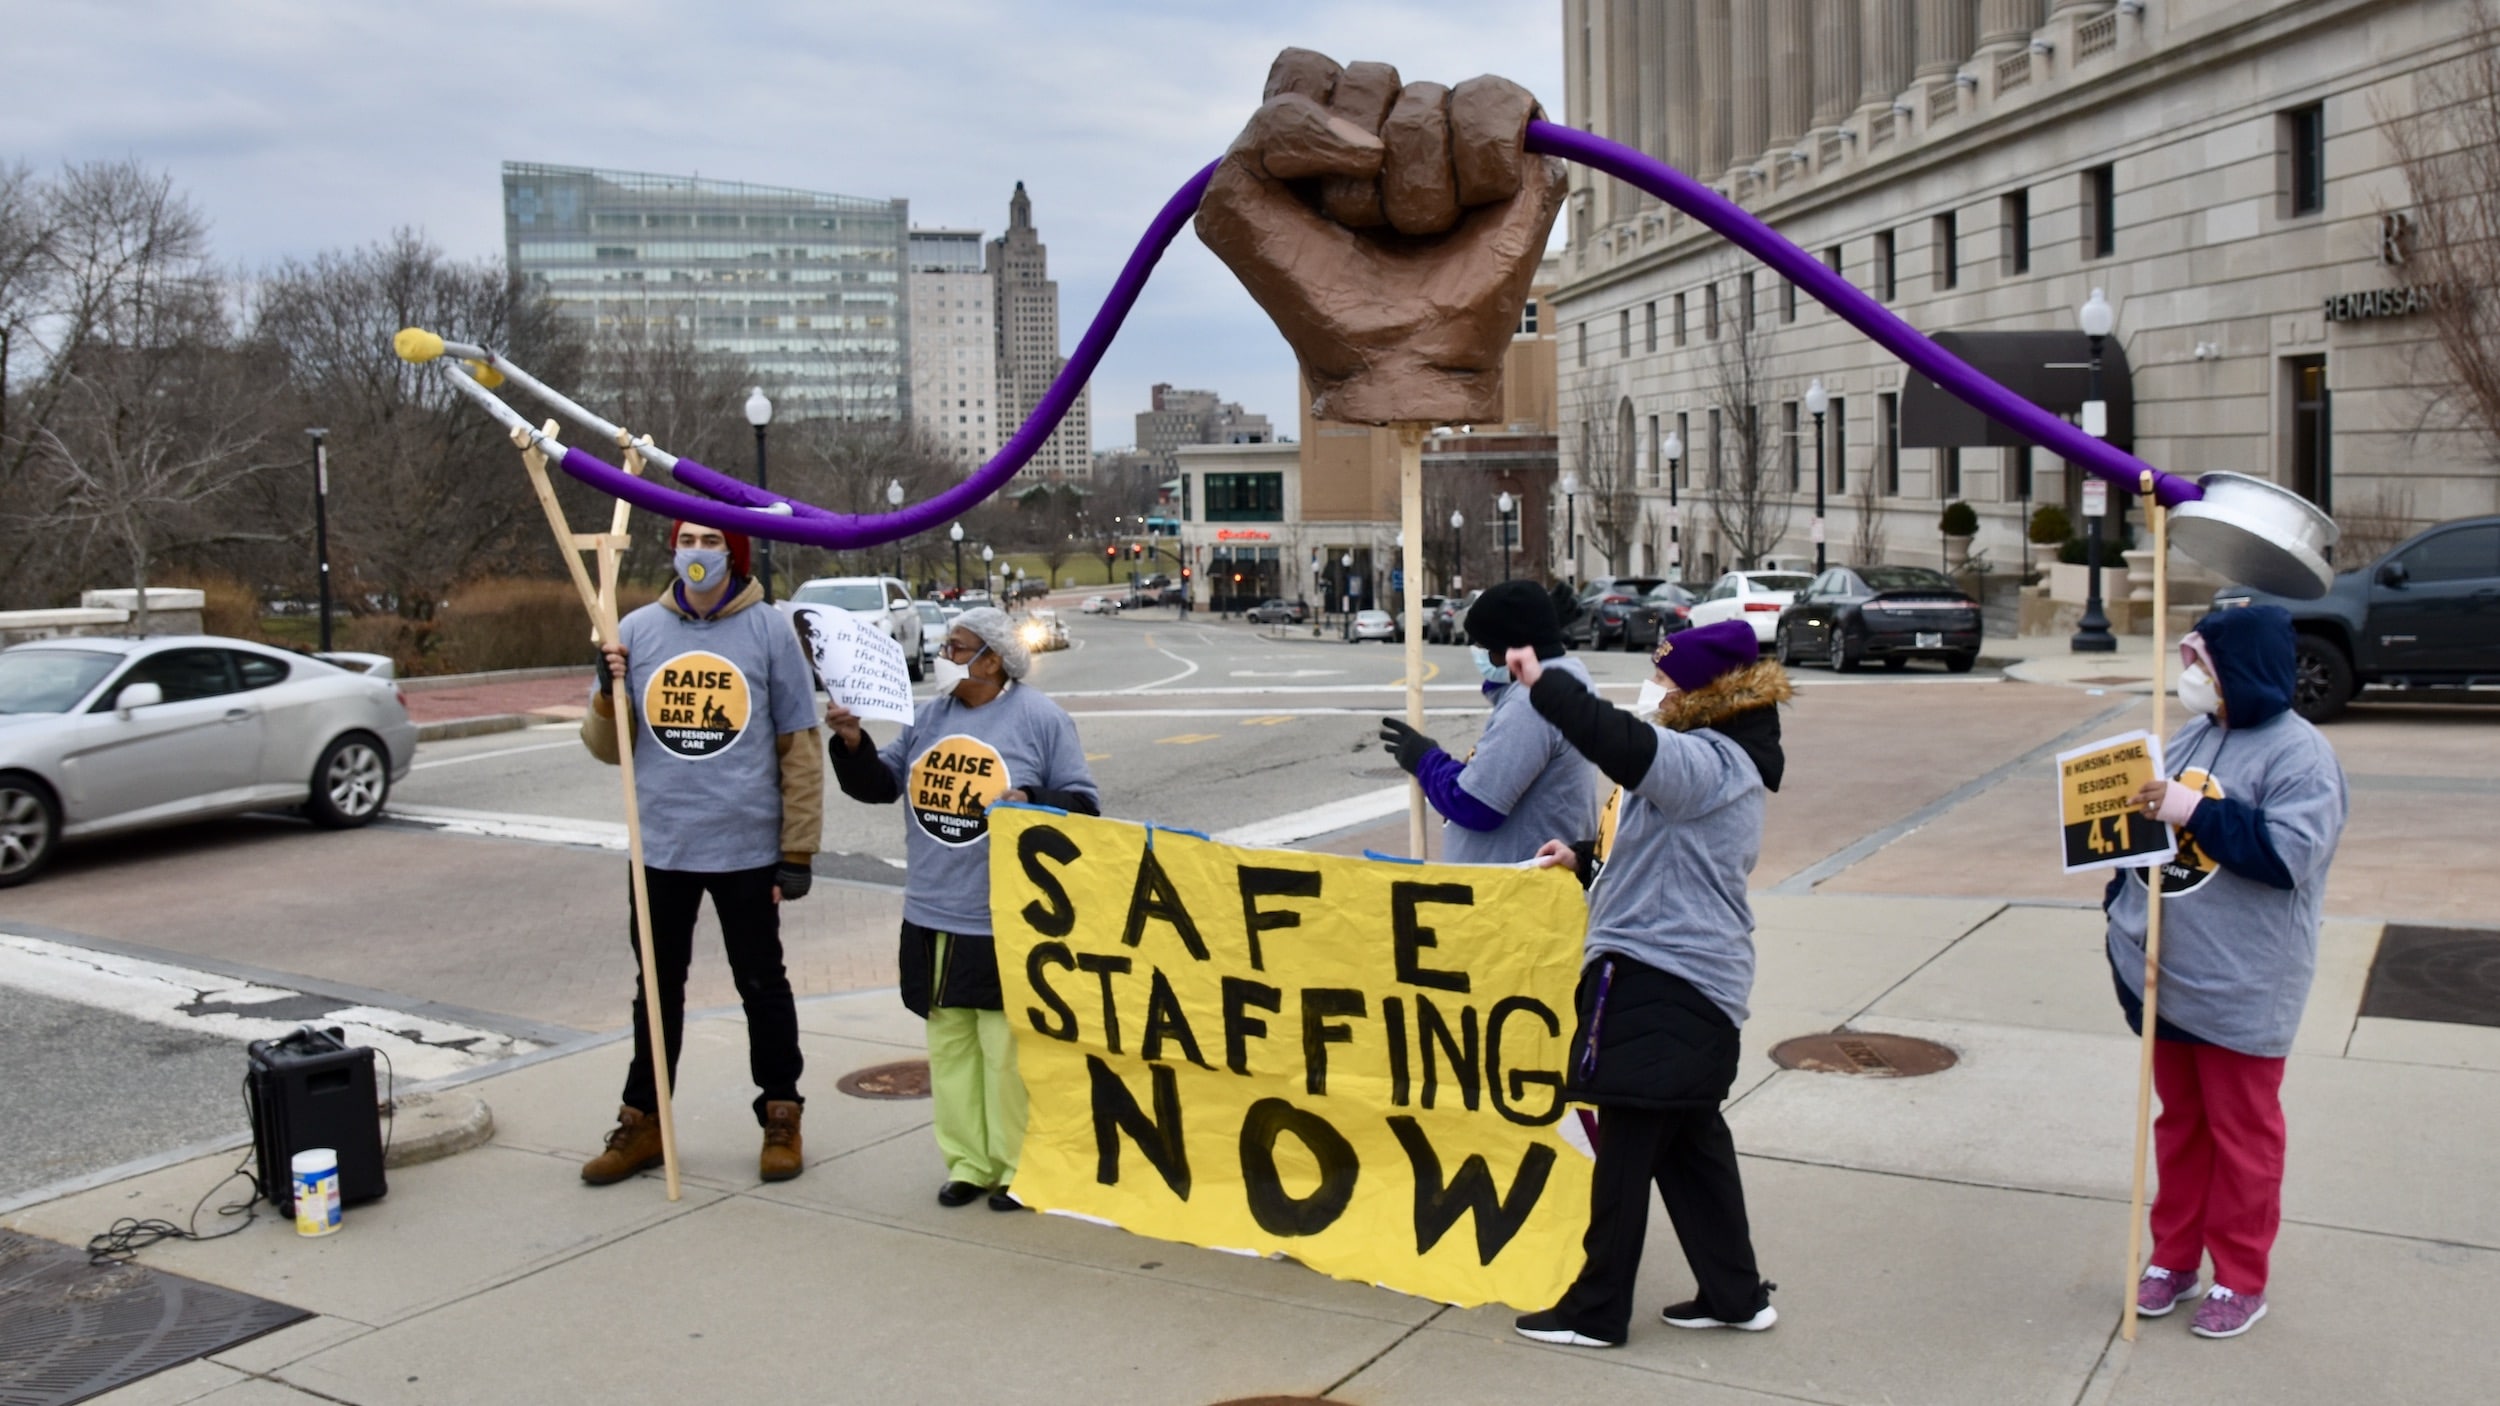 Rhode Island: As General Assembly convenes, nursing home workers rally for safe staffing and fair wages